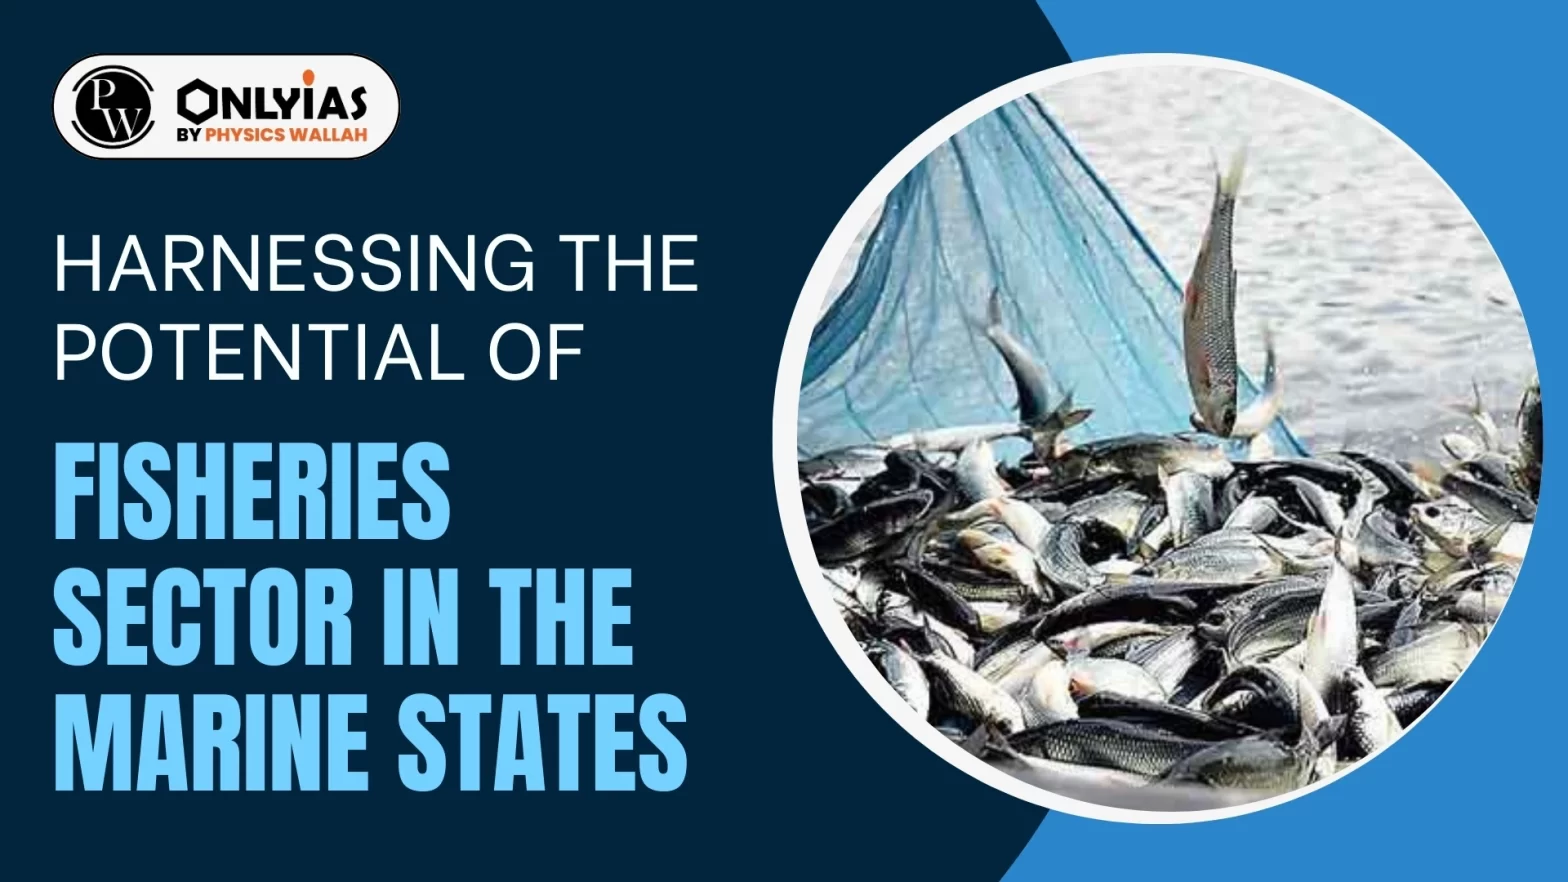 Harnessing the Potential of Fisheries Sector in the Marine States